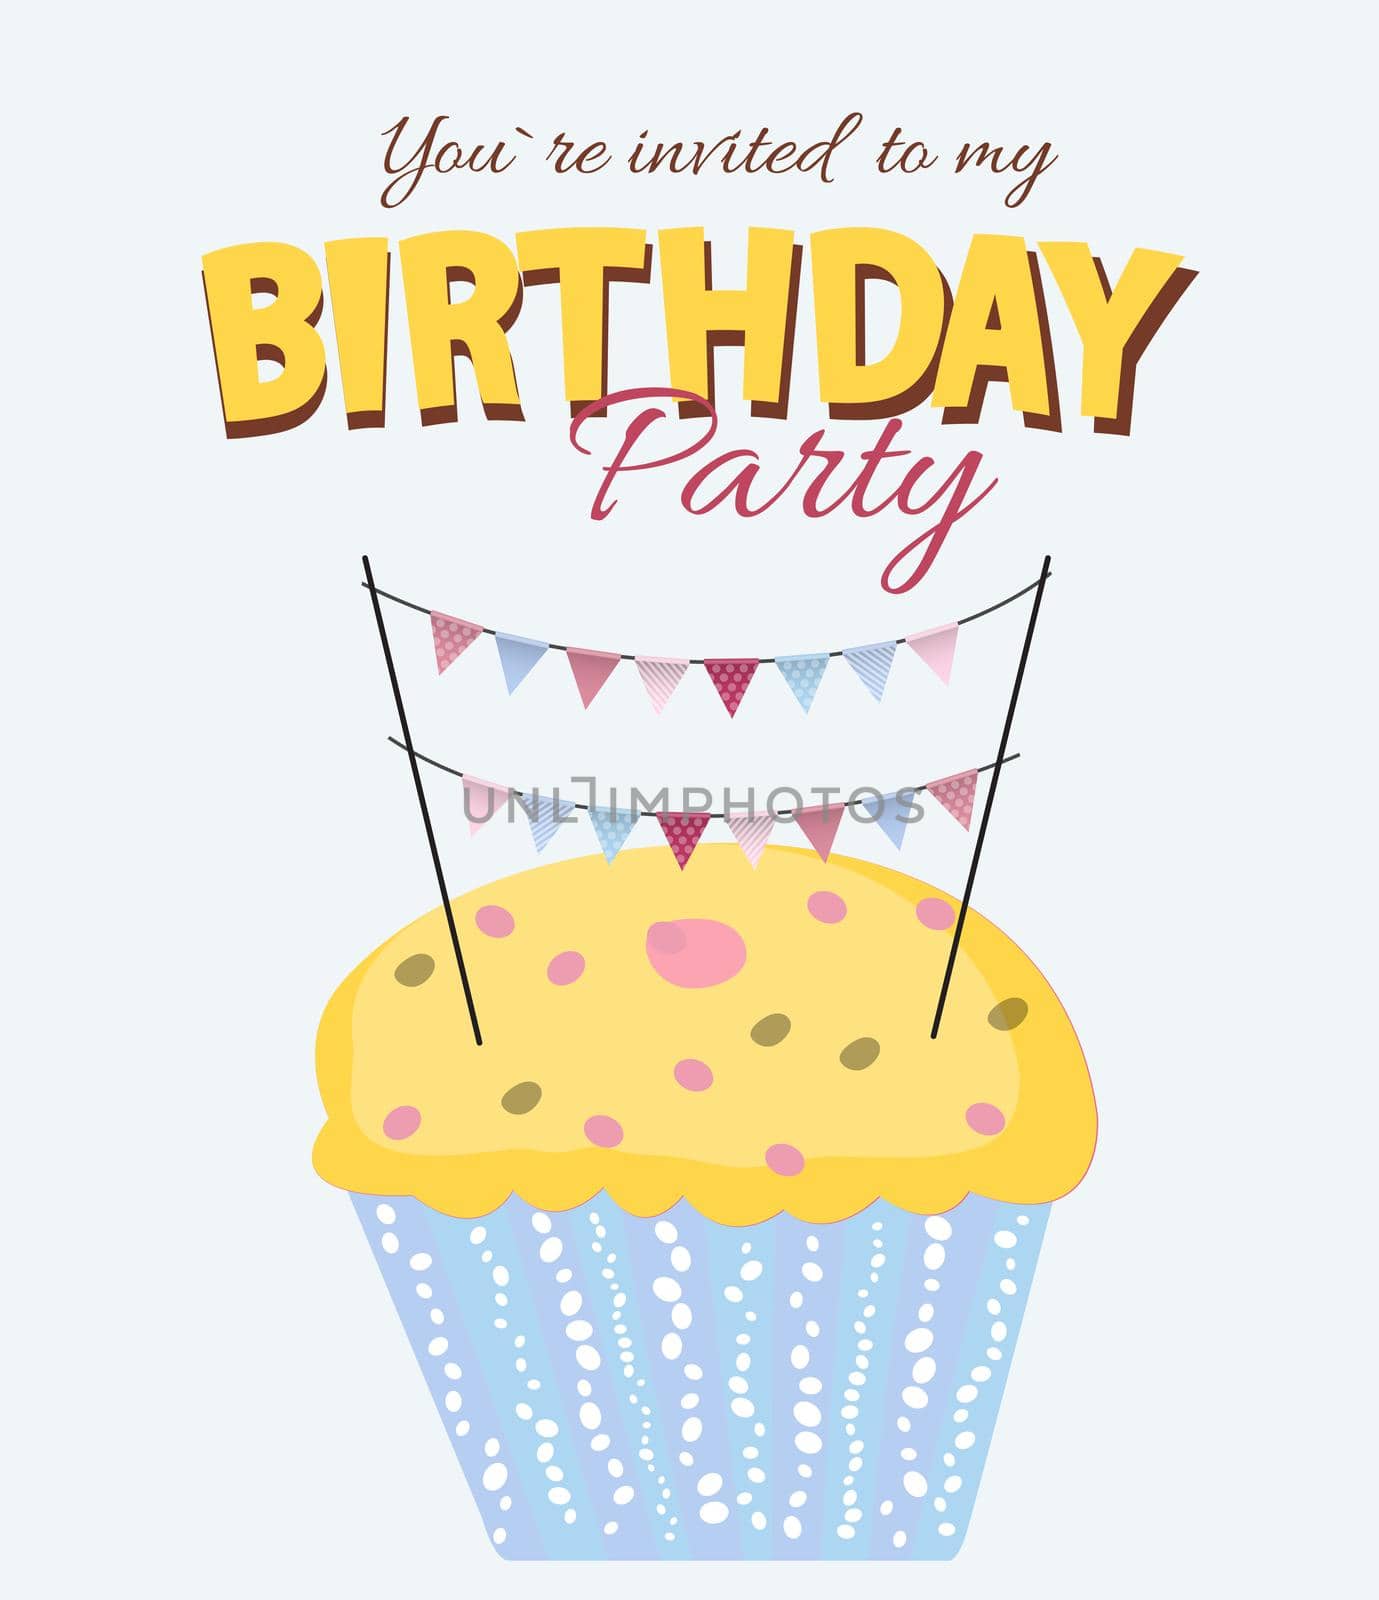 Happy Birthday Card Baner Background with Cake. Vector Illustration by yganko